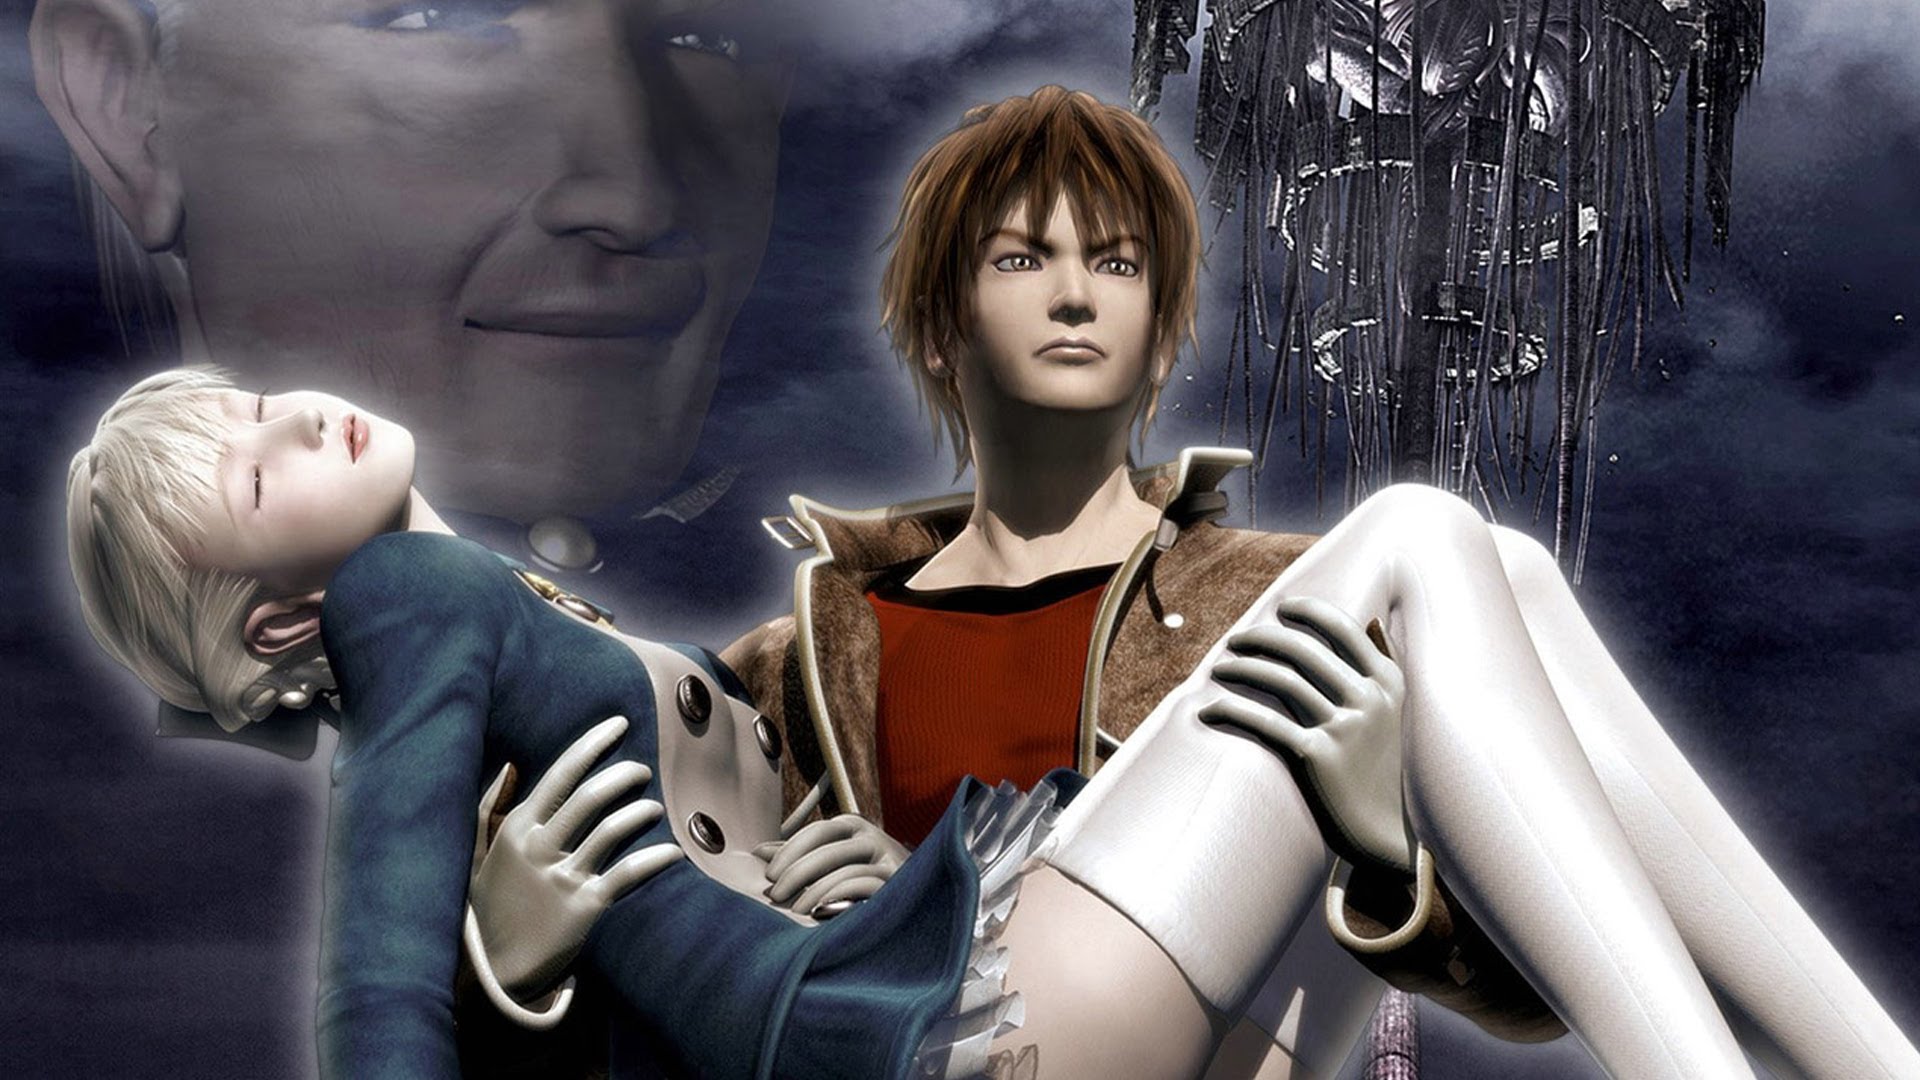 Shadow Hearts Backgrounds, Compatible - PC, Mobile, Gadgets| 1920x1080 px